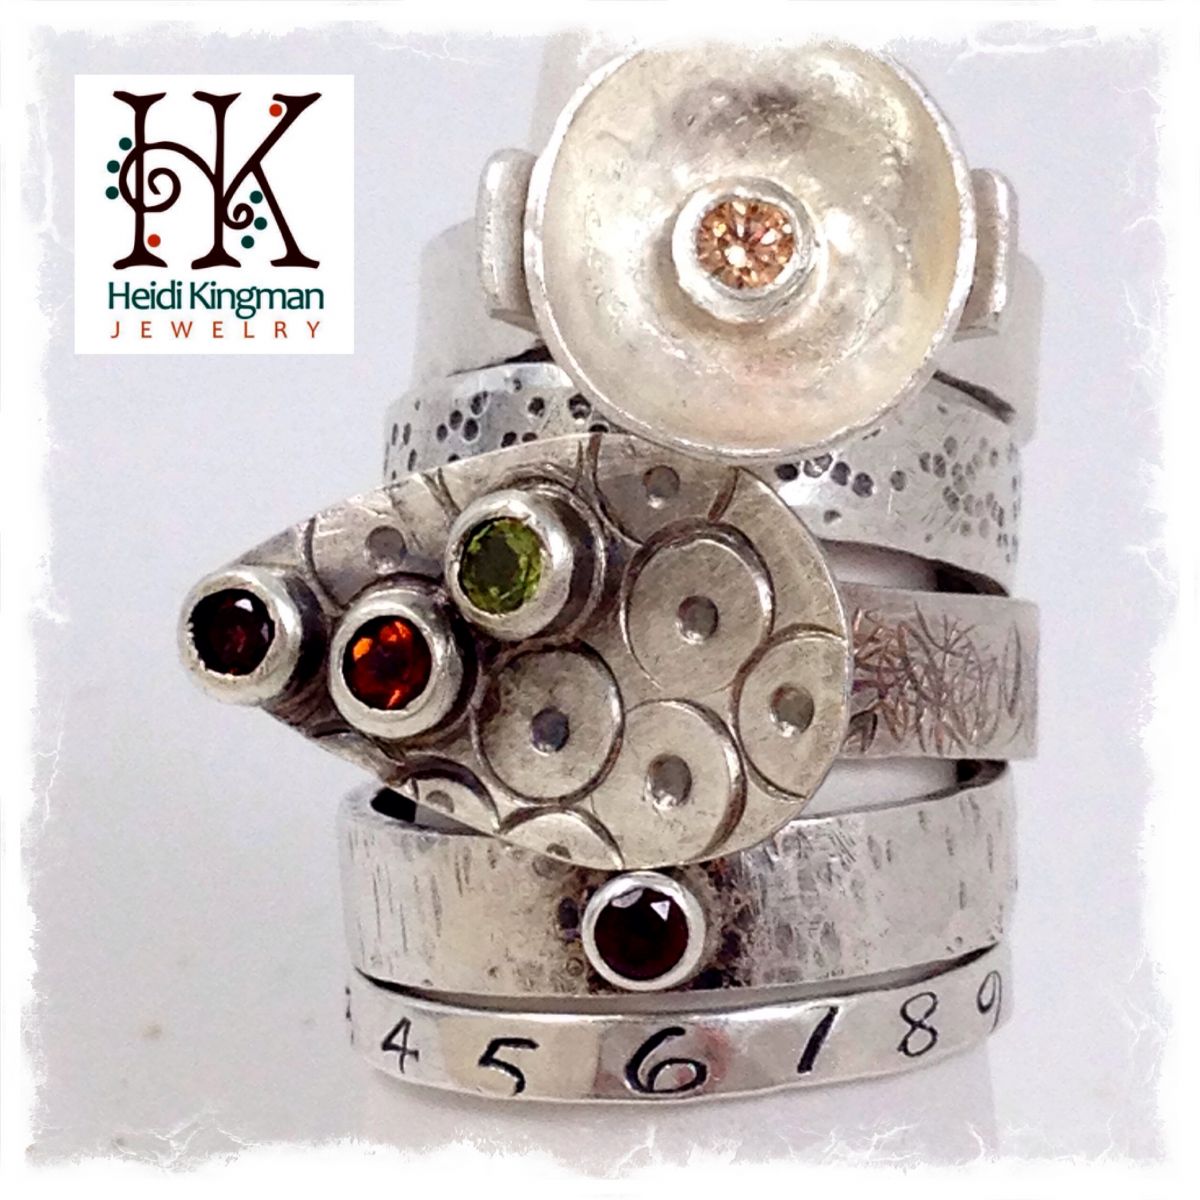 Kingman handwrought jewelry is upscale without being stuffy.